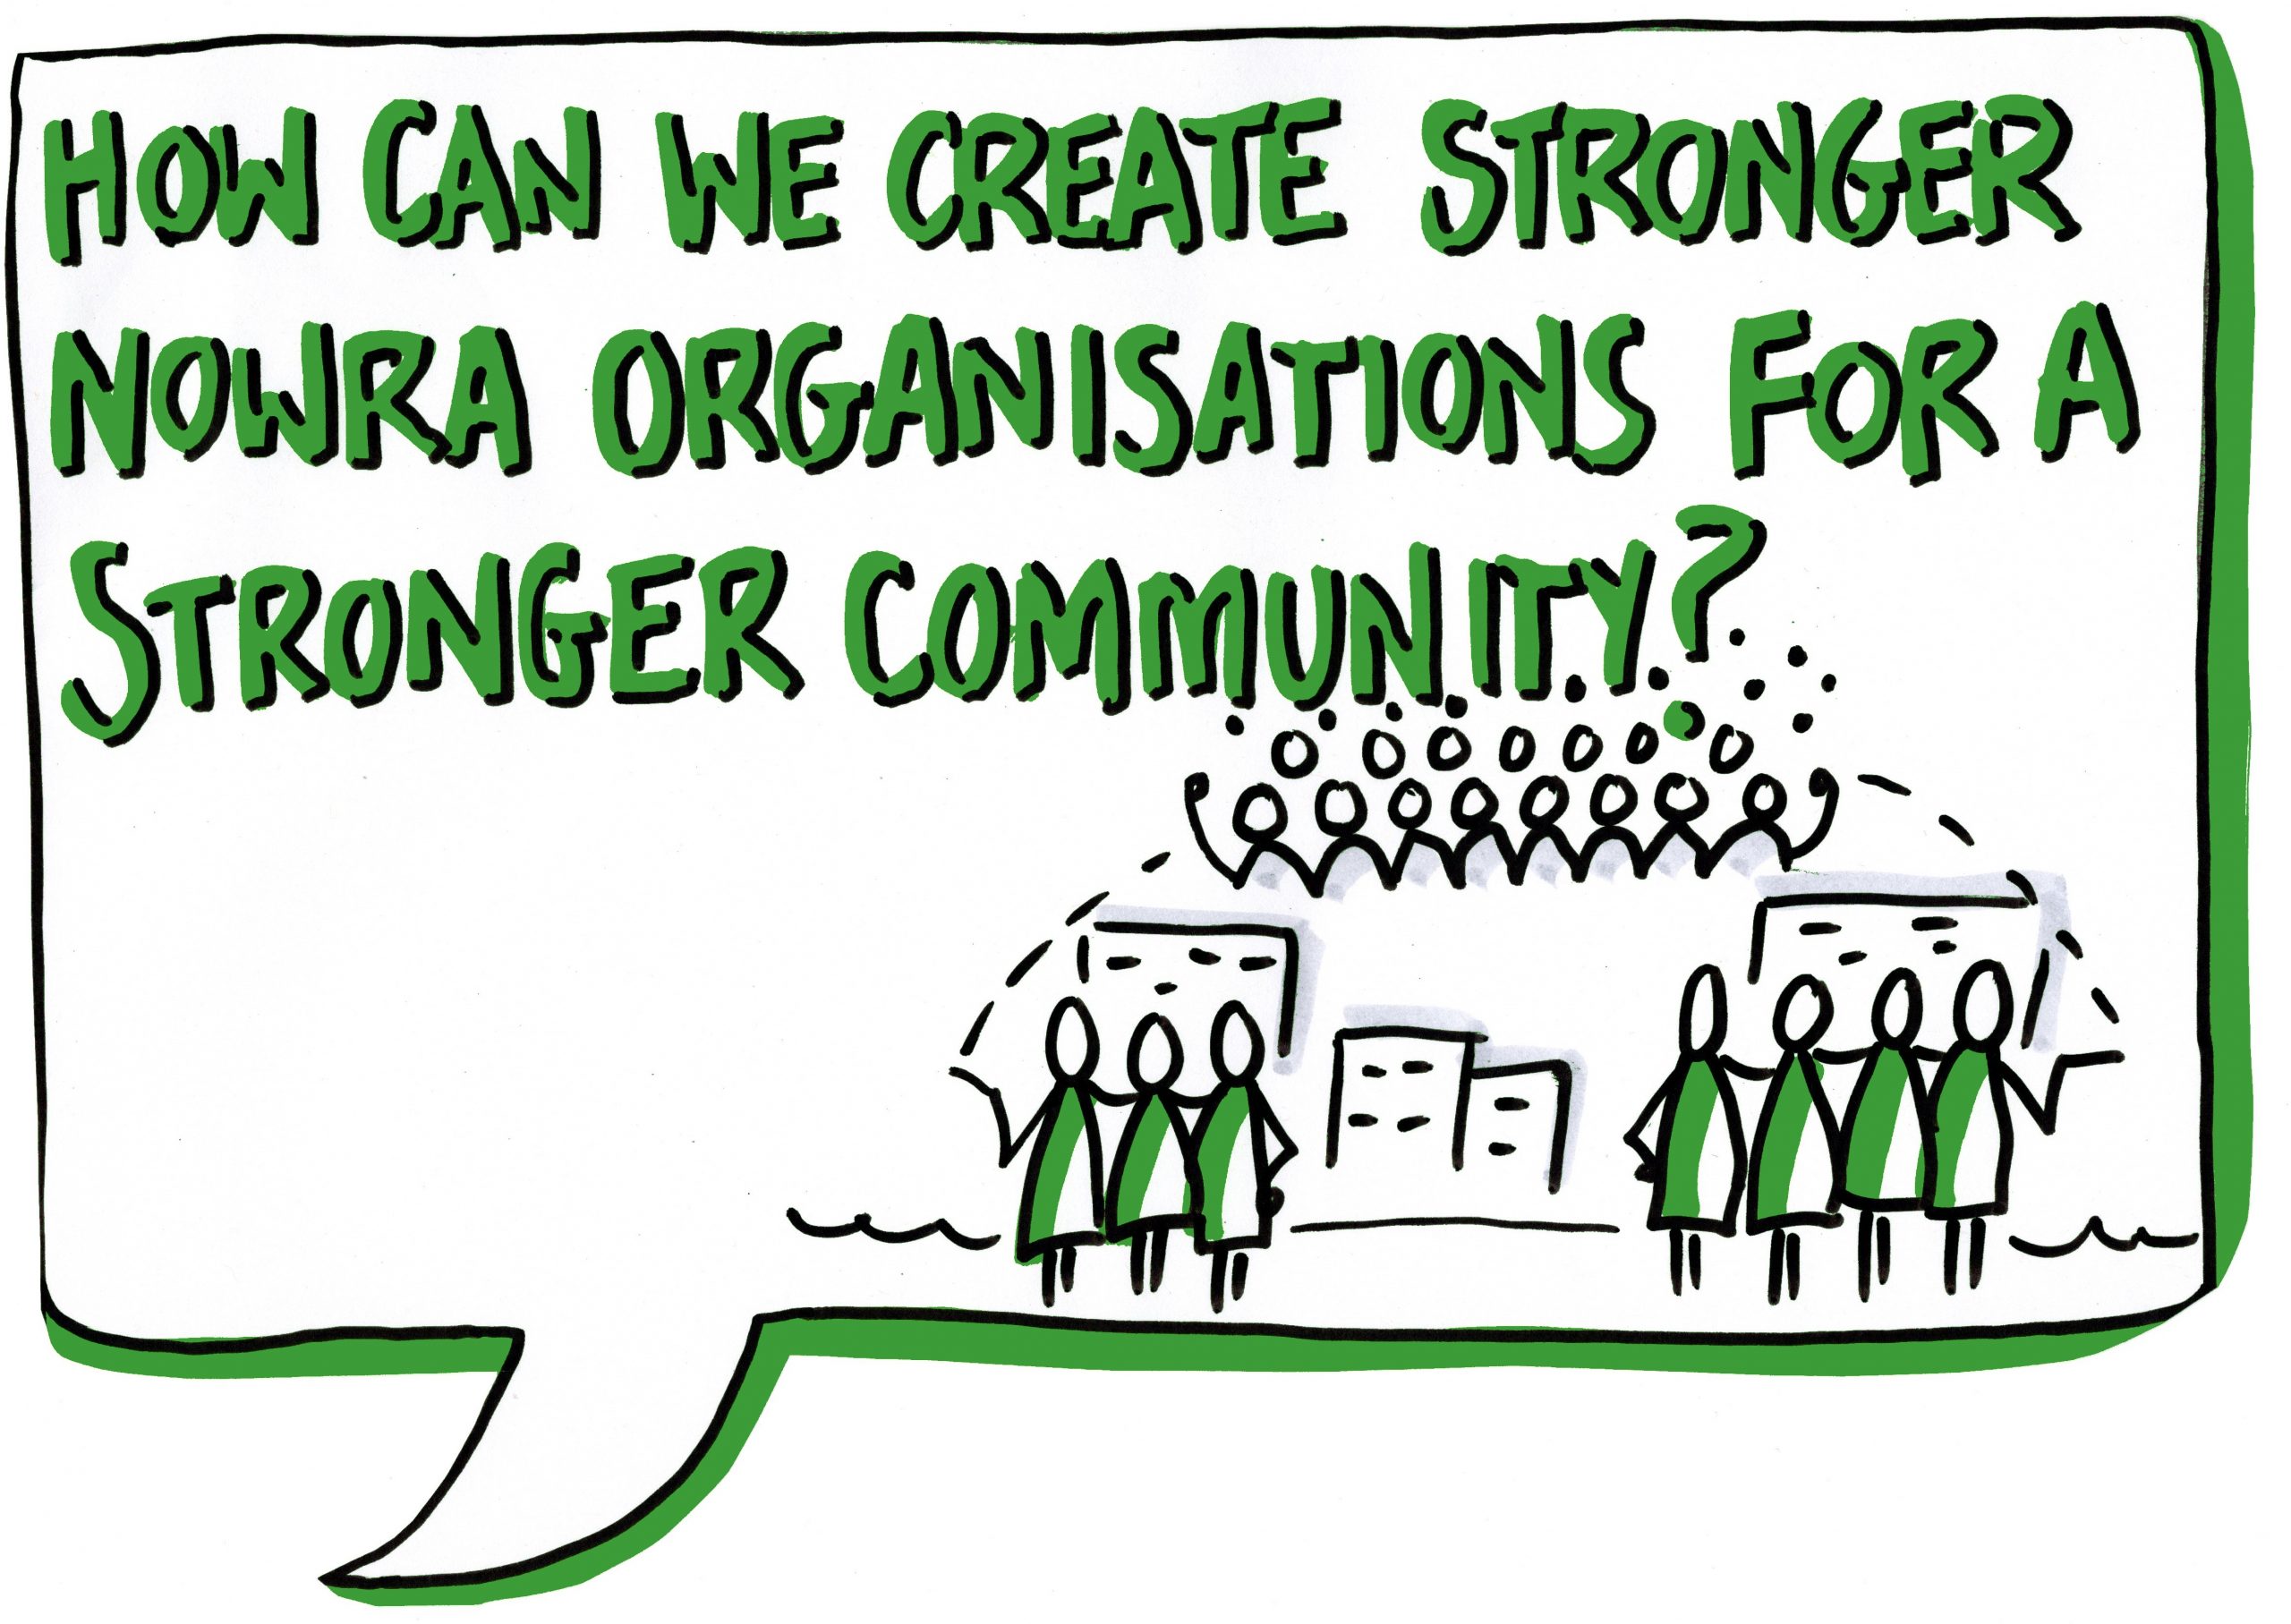 An illustration of a text box asking how can we create stronger nowra organisations for a stronger community